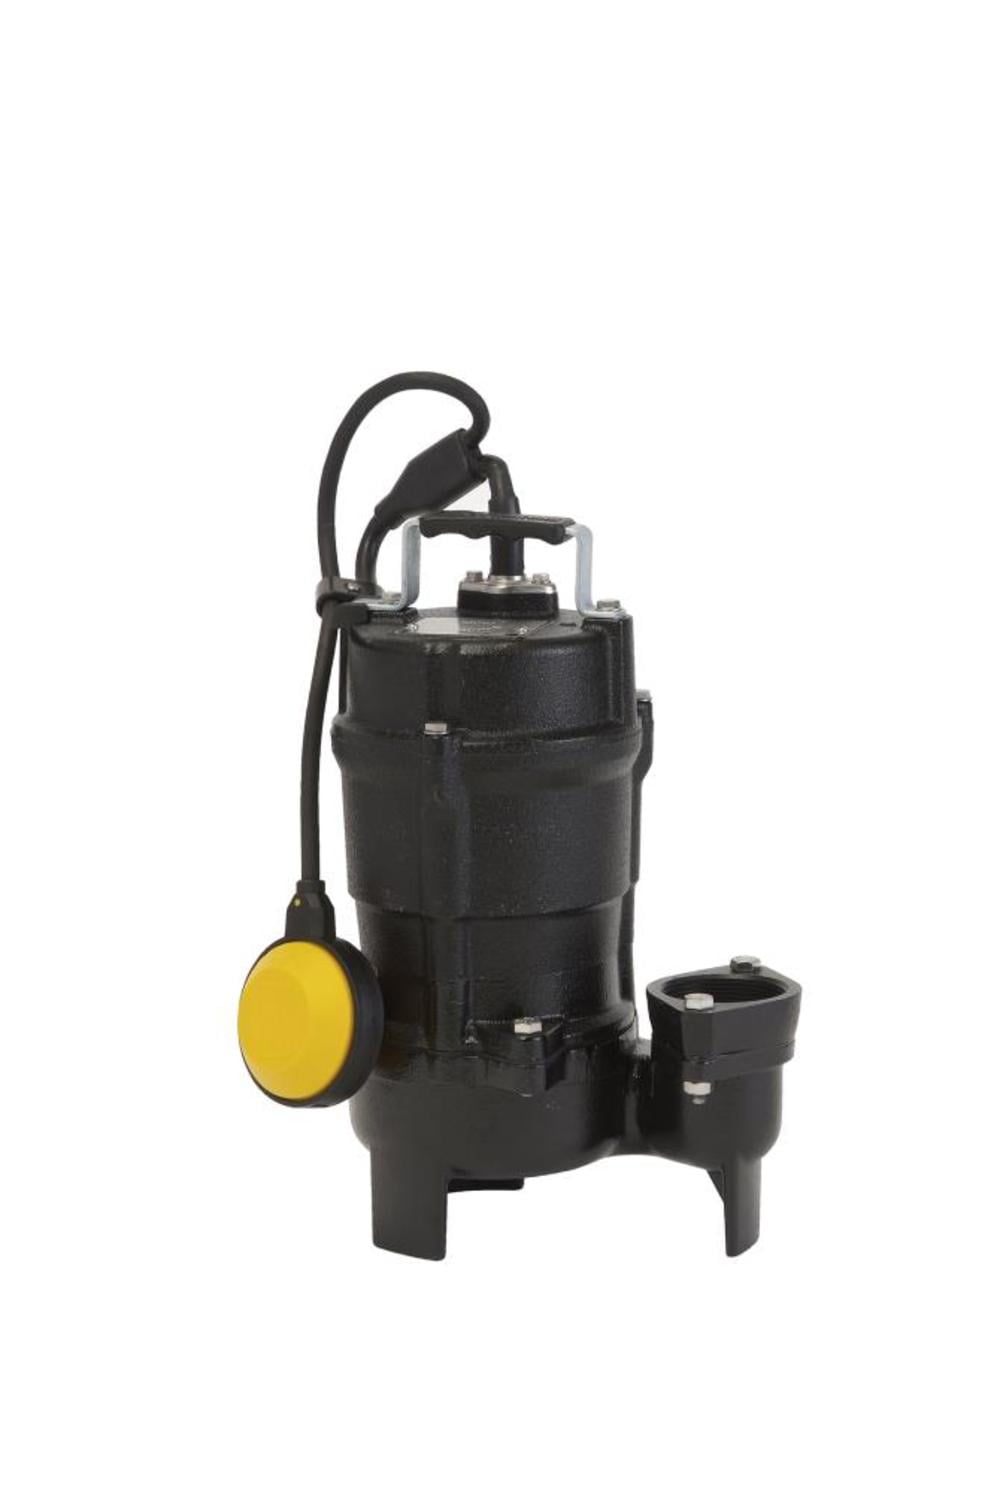 Tsurumi Submersible Water Pump Float Switch Up to 2/3 HP 